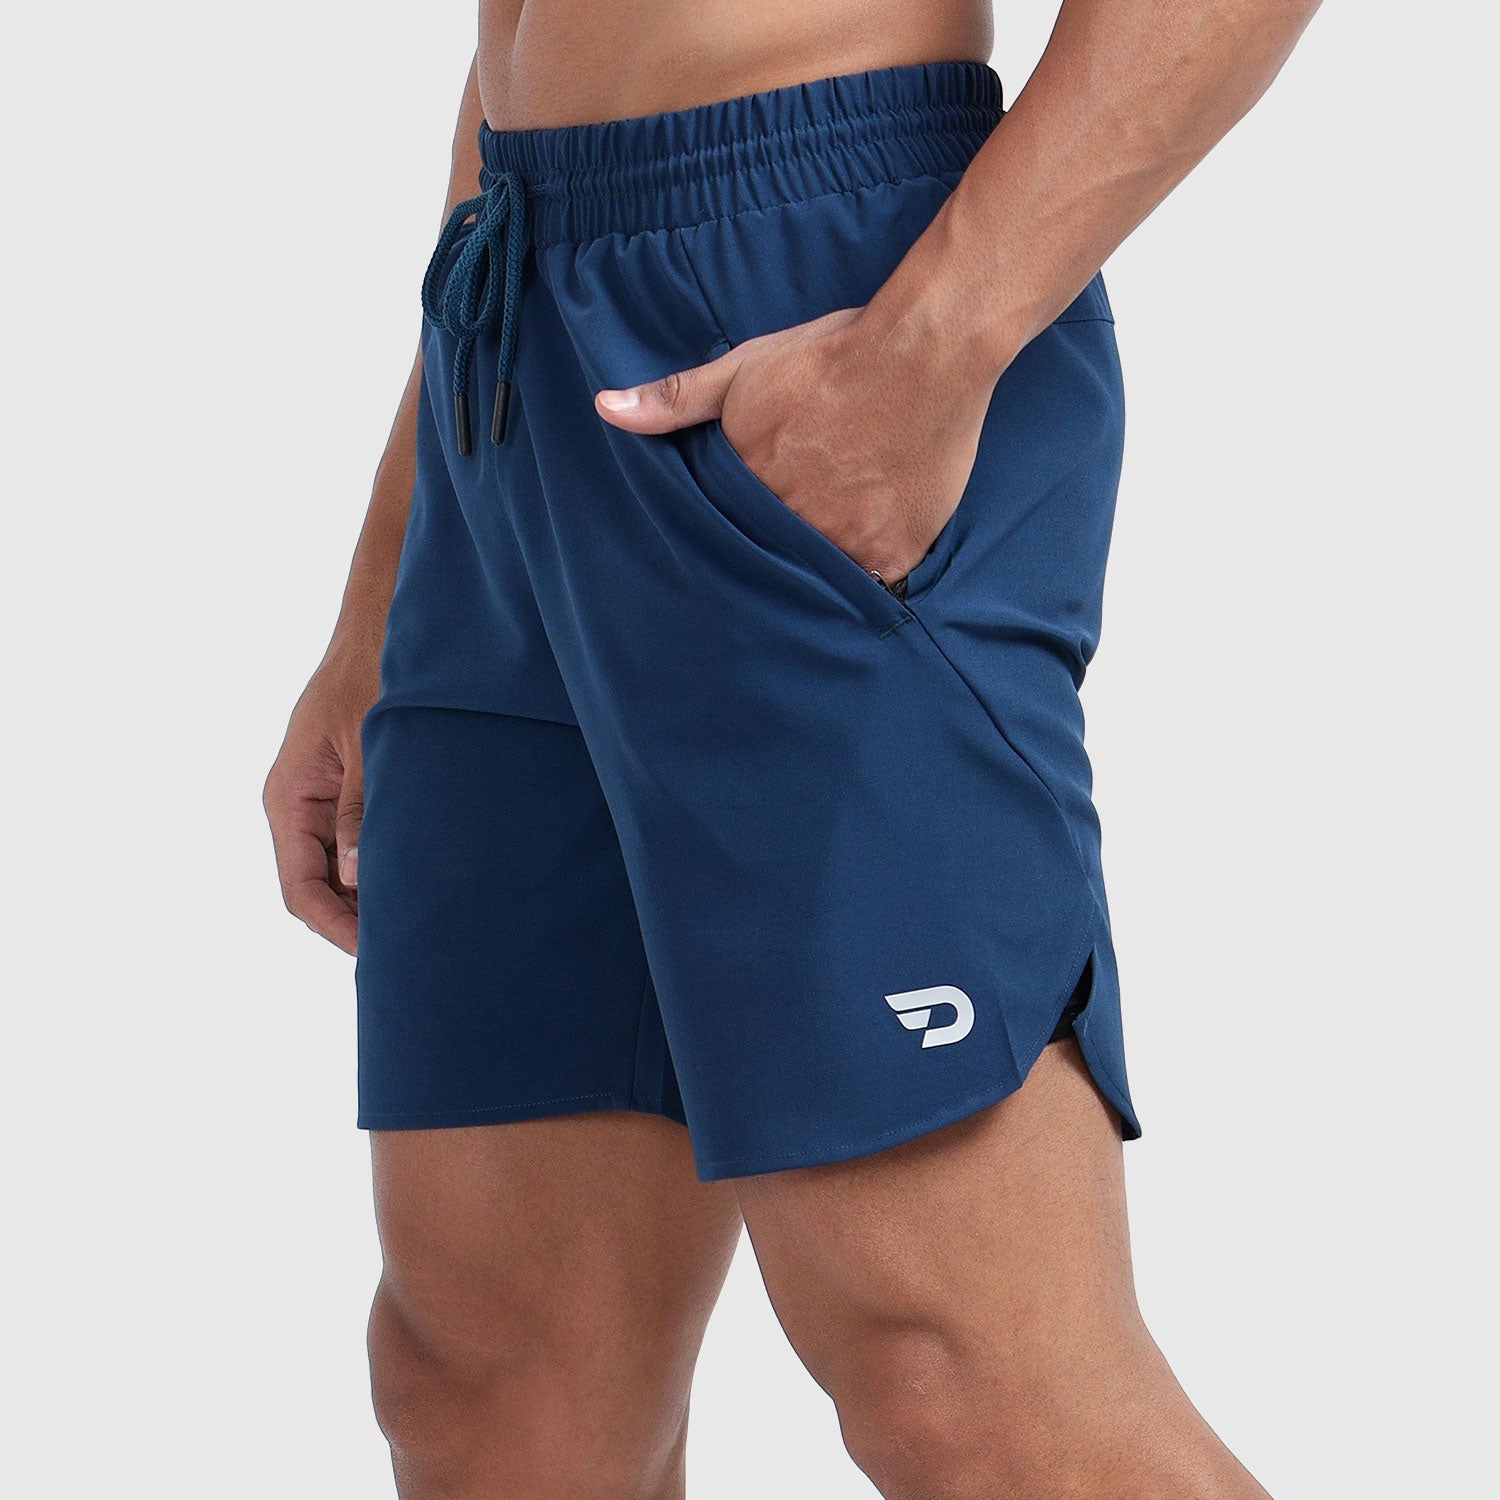 Denmonk's fashionable 2-IN-1 SHORTS regal blue shorts for men will boost your level of gym fitness.